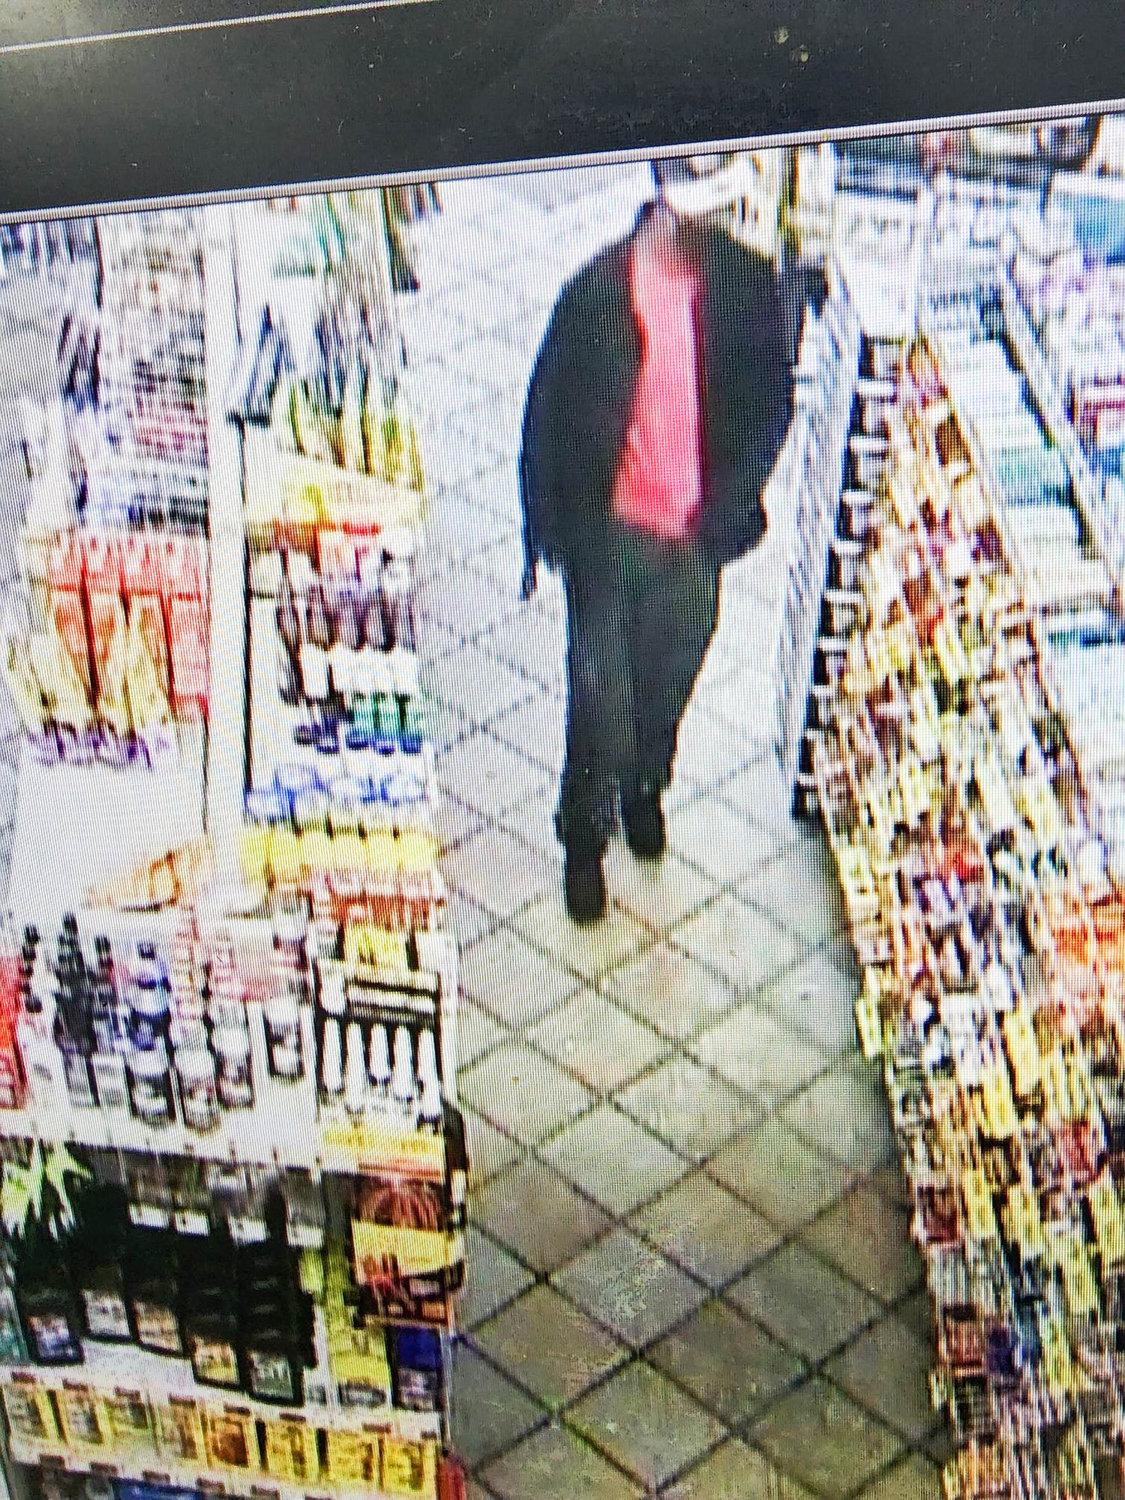 This suspect is wanted for back-to-back store larcenies on Oriskany Boulevard in Whitesboro and Yorkville from Wednesday morning. If you recognize him, contact the Yorkville Police Department at 315-736-8331 or the Whitesboro Police Department at 315-736-1944.